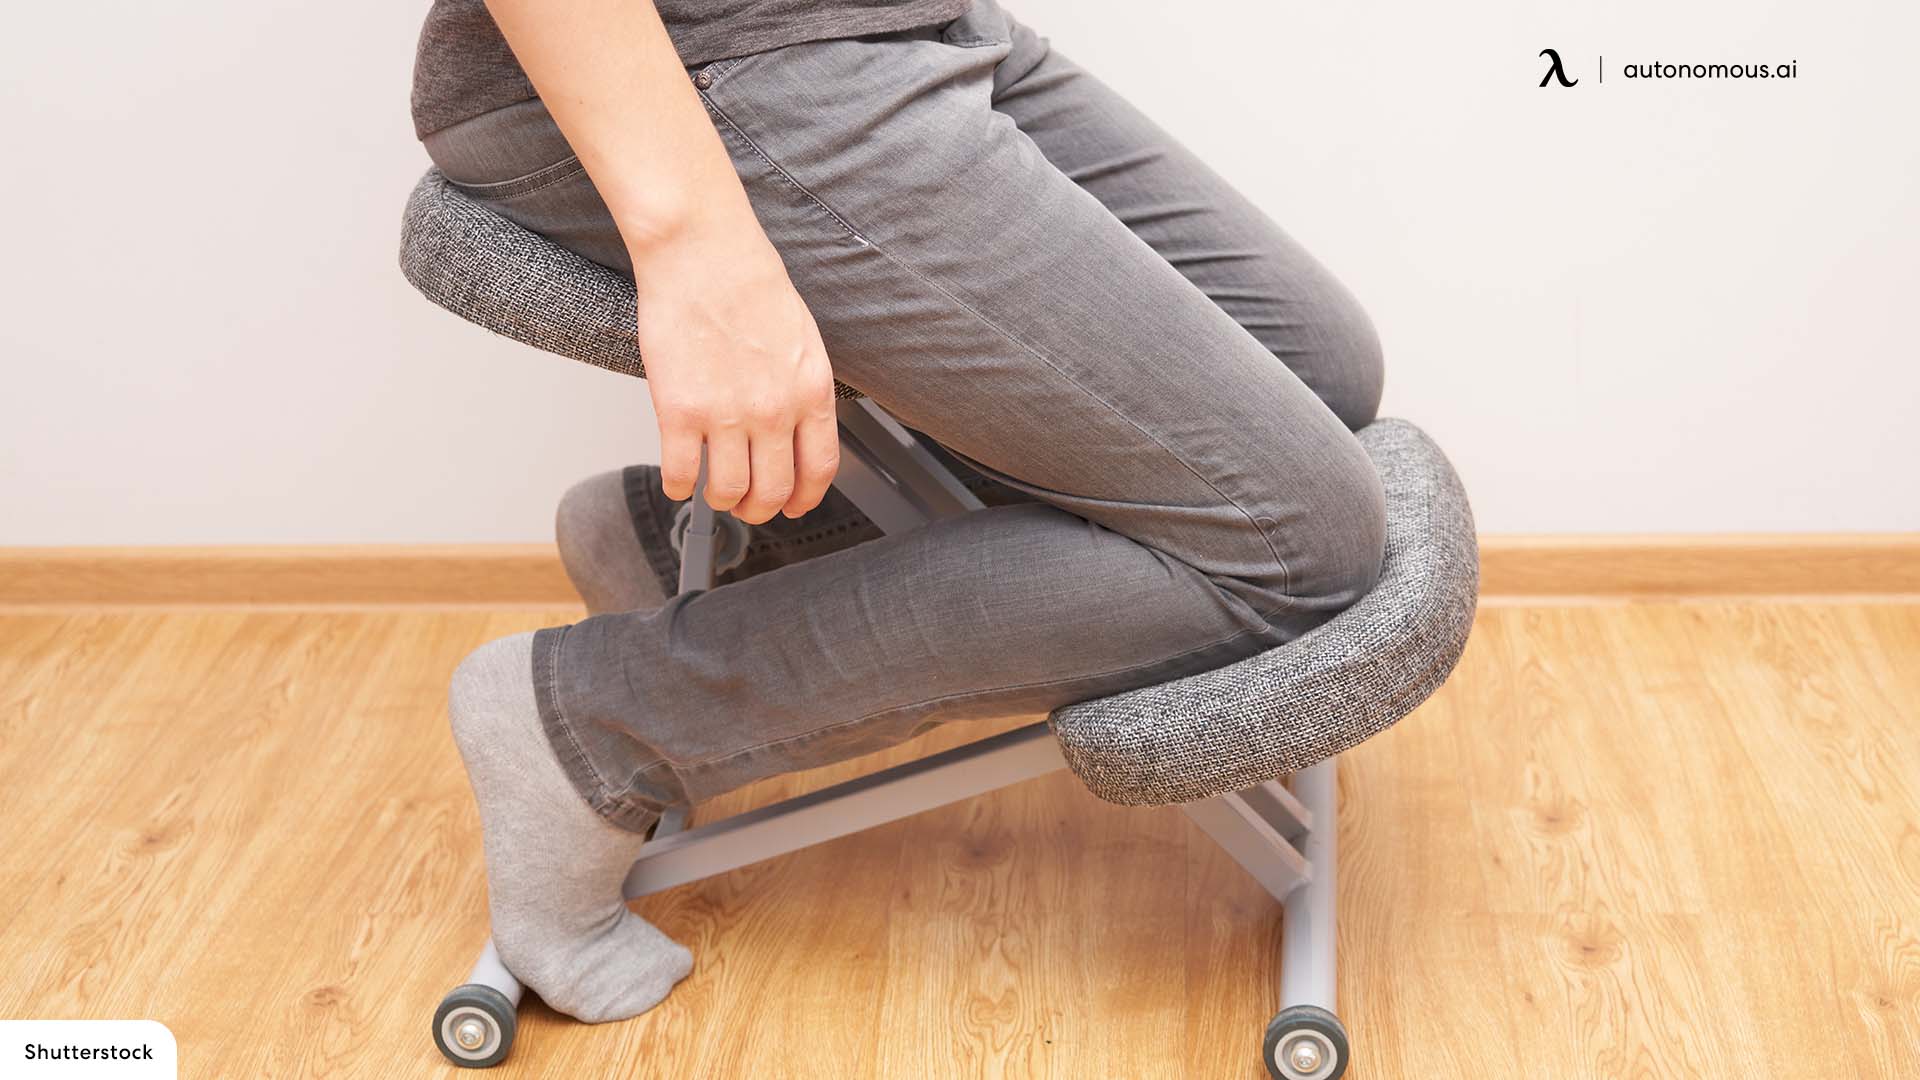 kneeling chair benefits and Cons